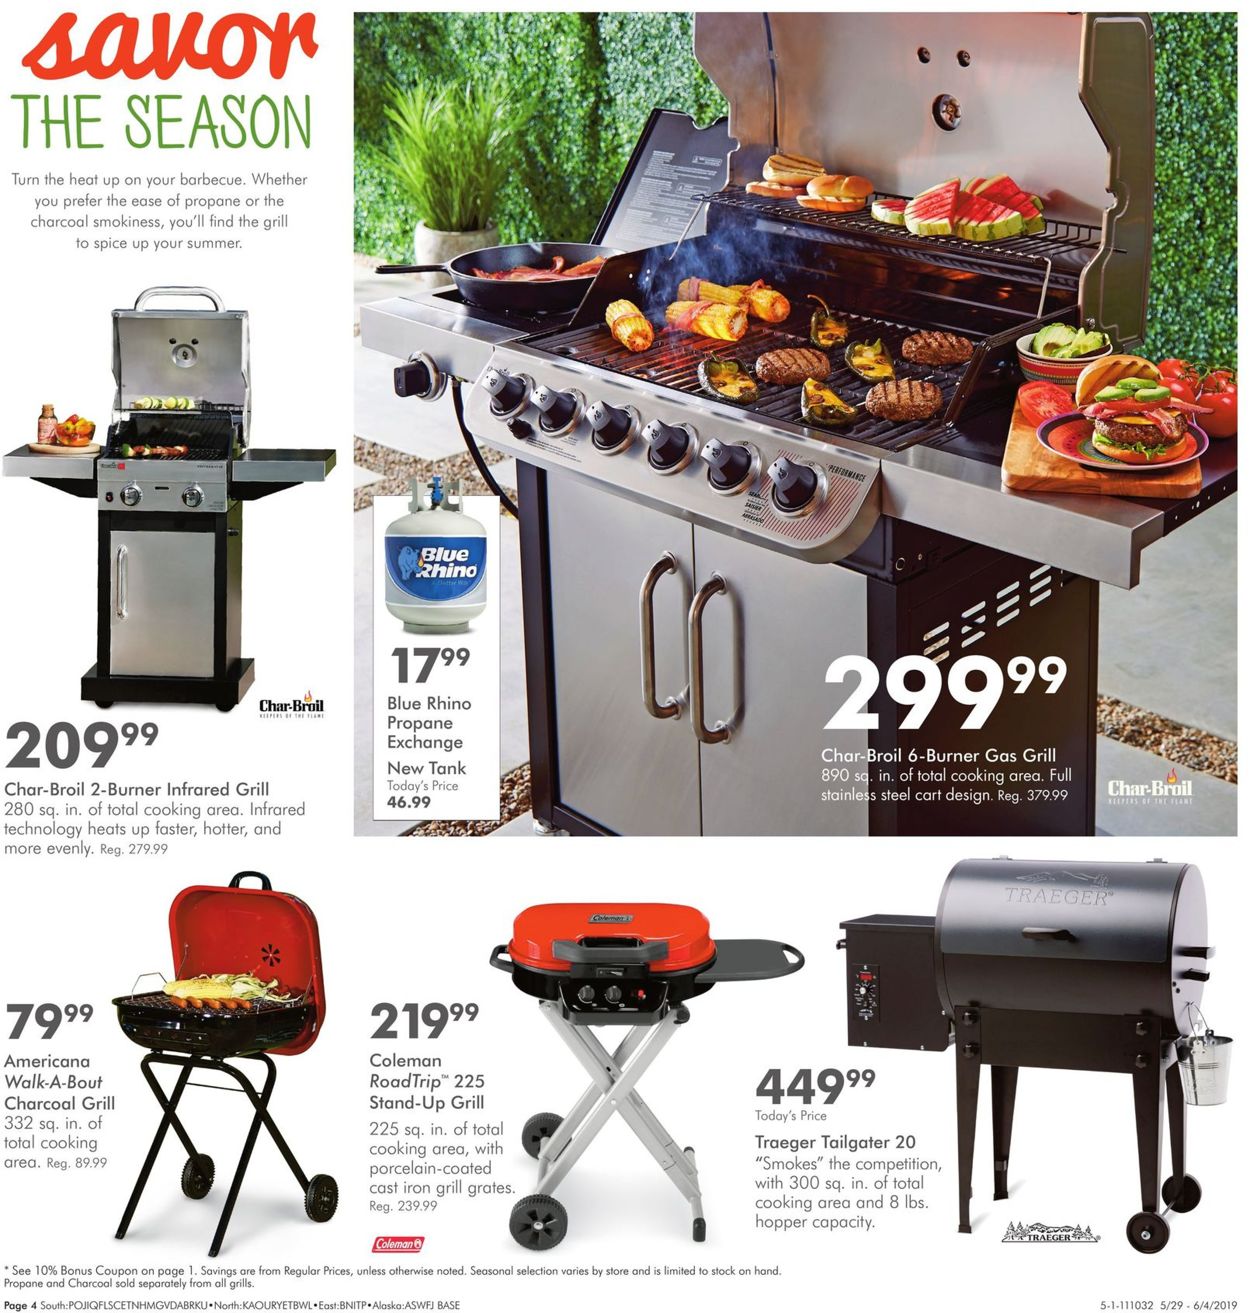 fred meyer current weekly ad 05 29 06 04 2019 4 frequent ads com fred meyer current weekly ad 05 29 06